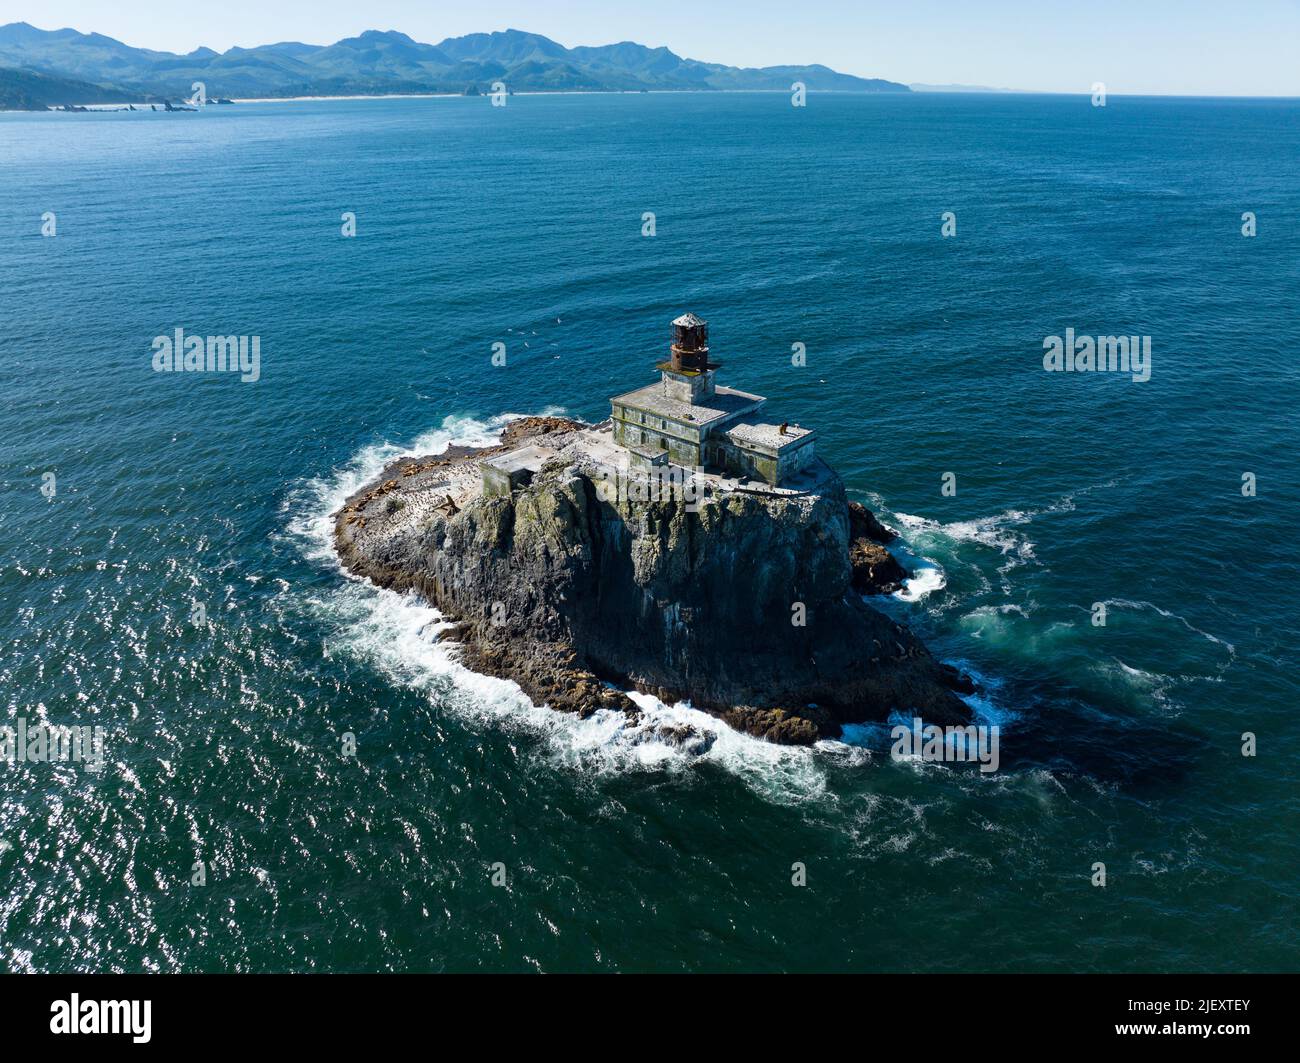 The Pacific Ocean surrounds the deactivated Tillamook Rock Lighthouse off the scenic Oregon coast. The historic lighthouse was built in 1880. Stock Photo